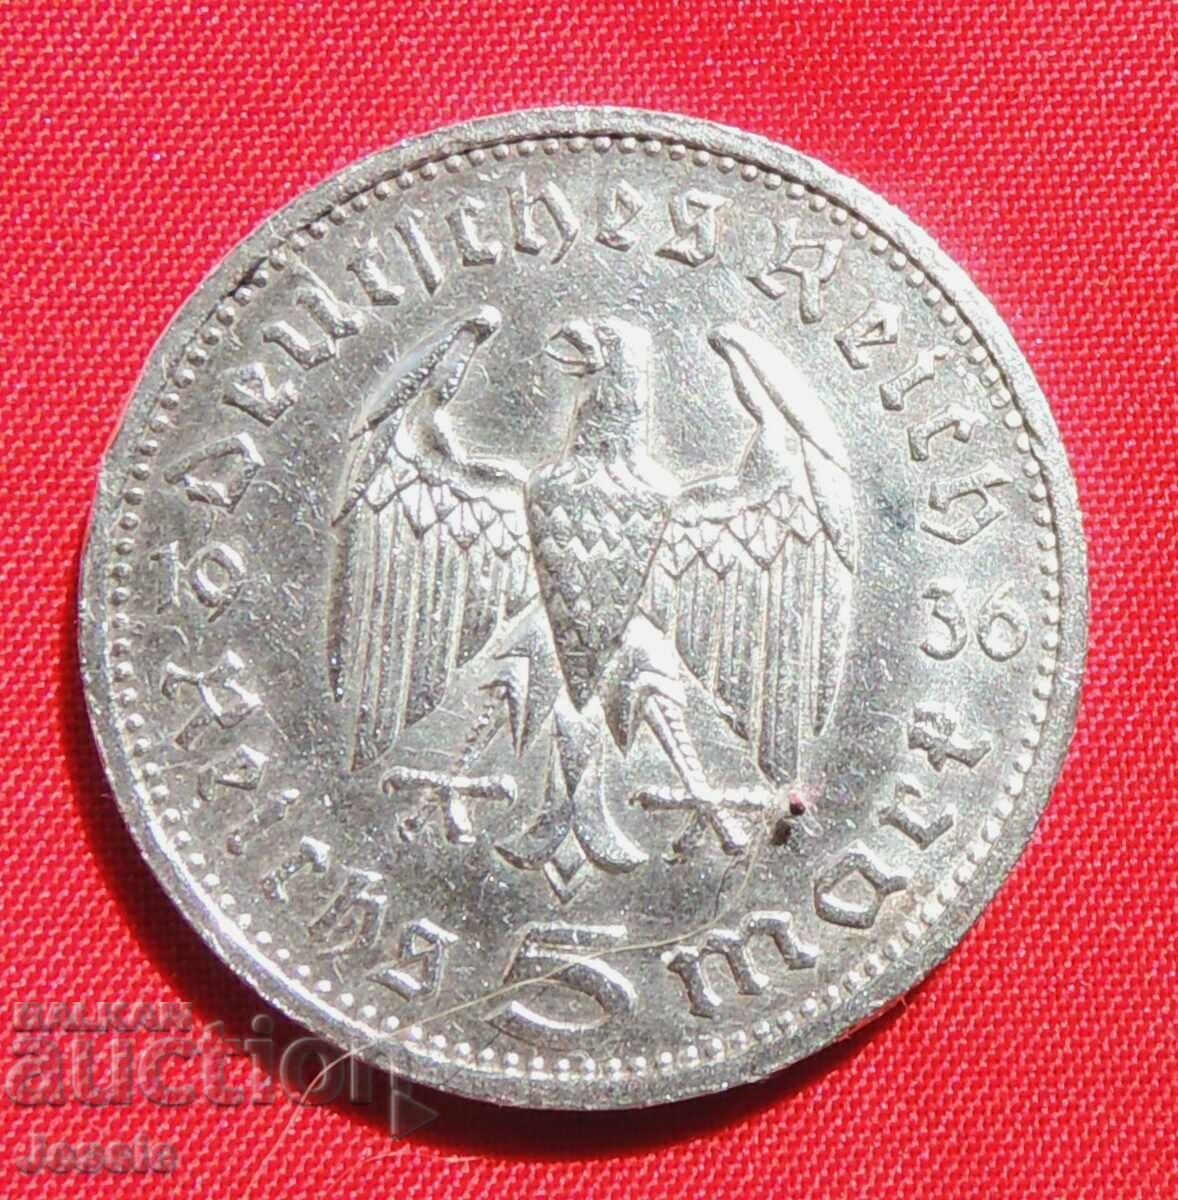 5 Reichsmarks 1936 E Germany silver Compare and Evaluate!